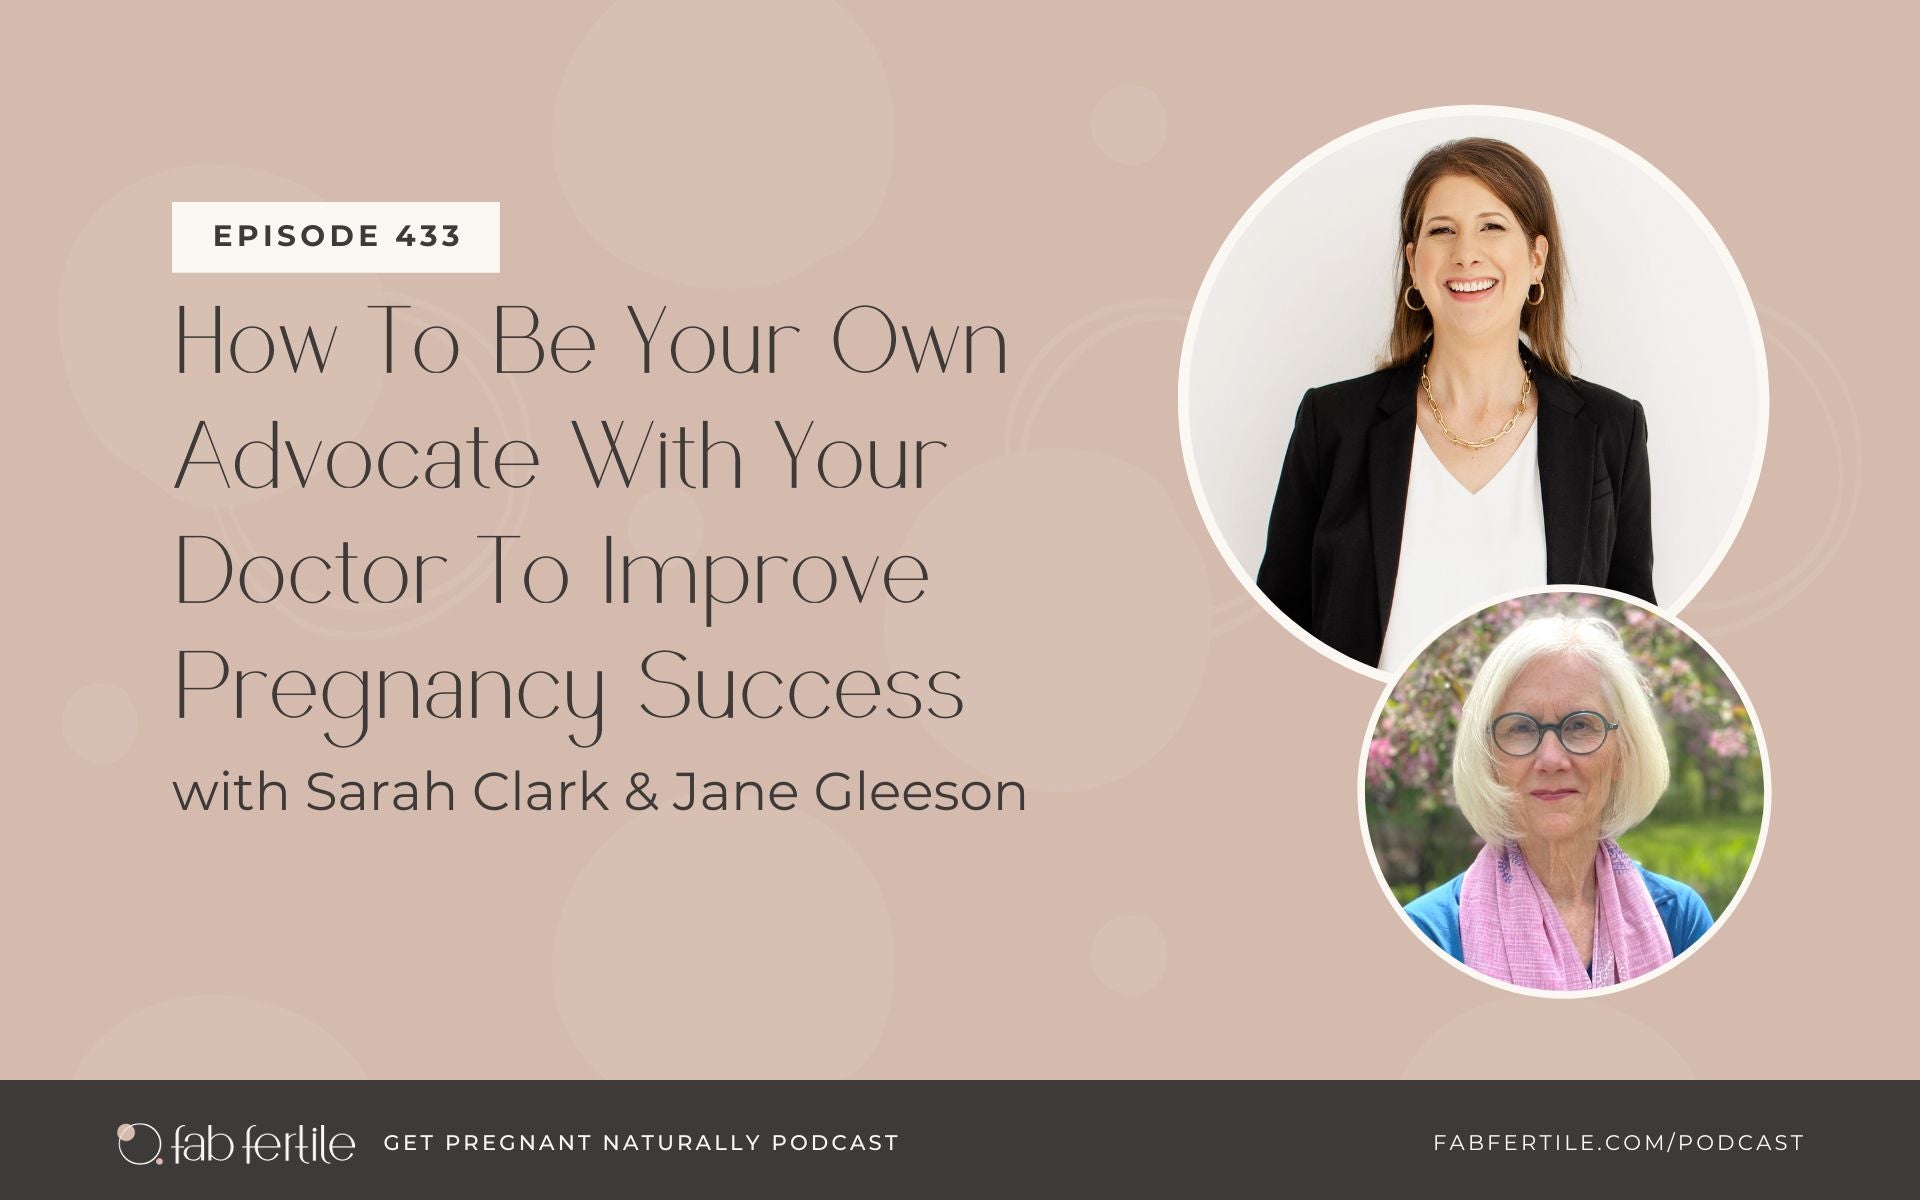 How To Be Your Own Advocate With Your Doctor To Improve Pregnancy Success with Jane Gleeson